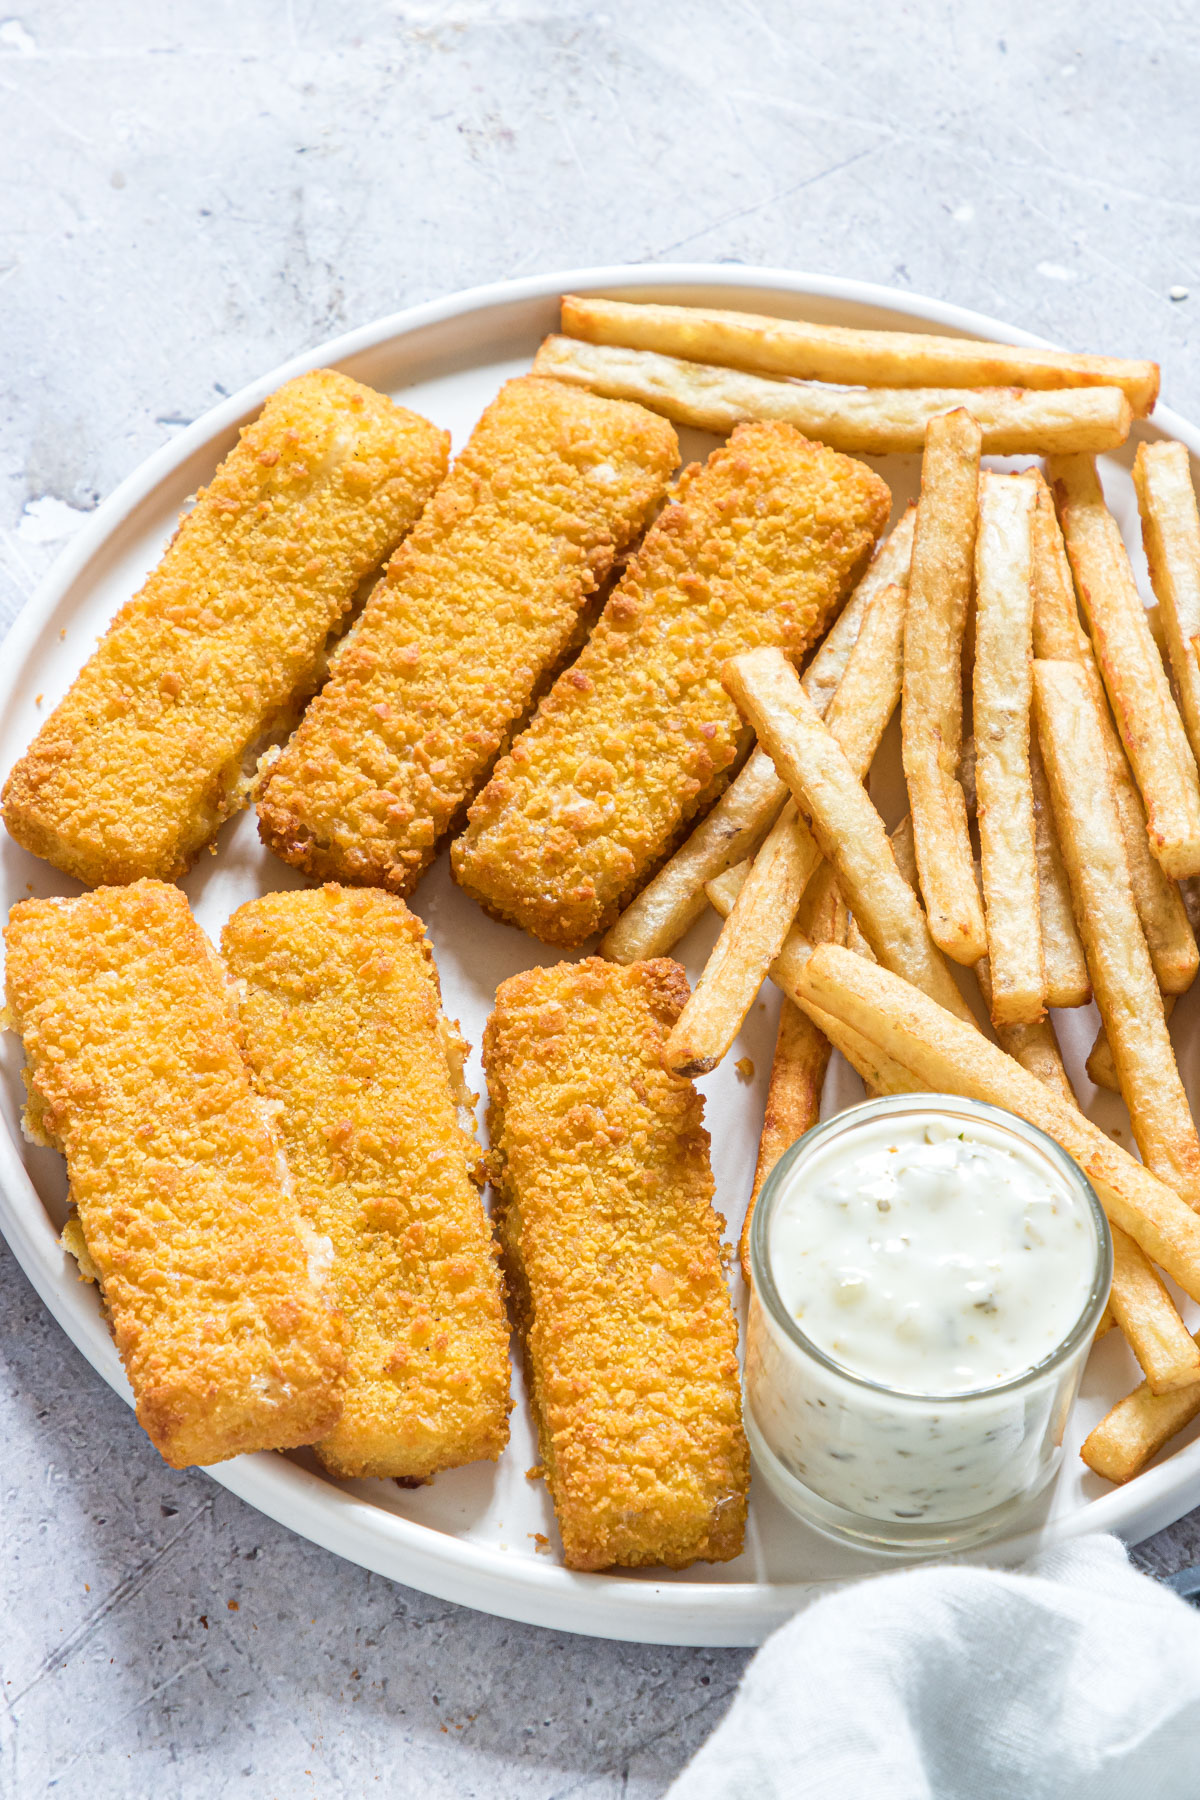 the completed air fryer frozen fish sticks served with french fries and tartar sauce